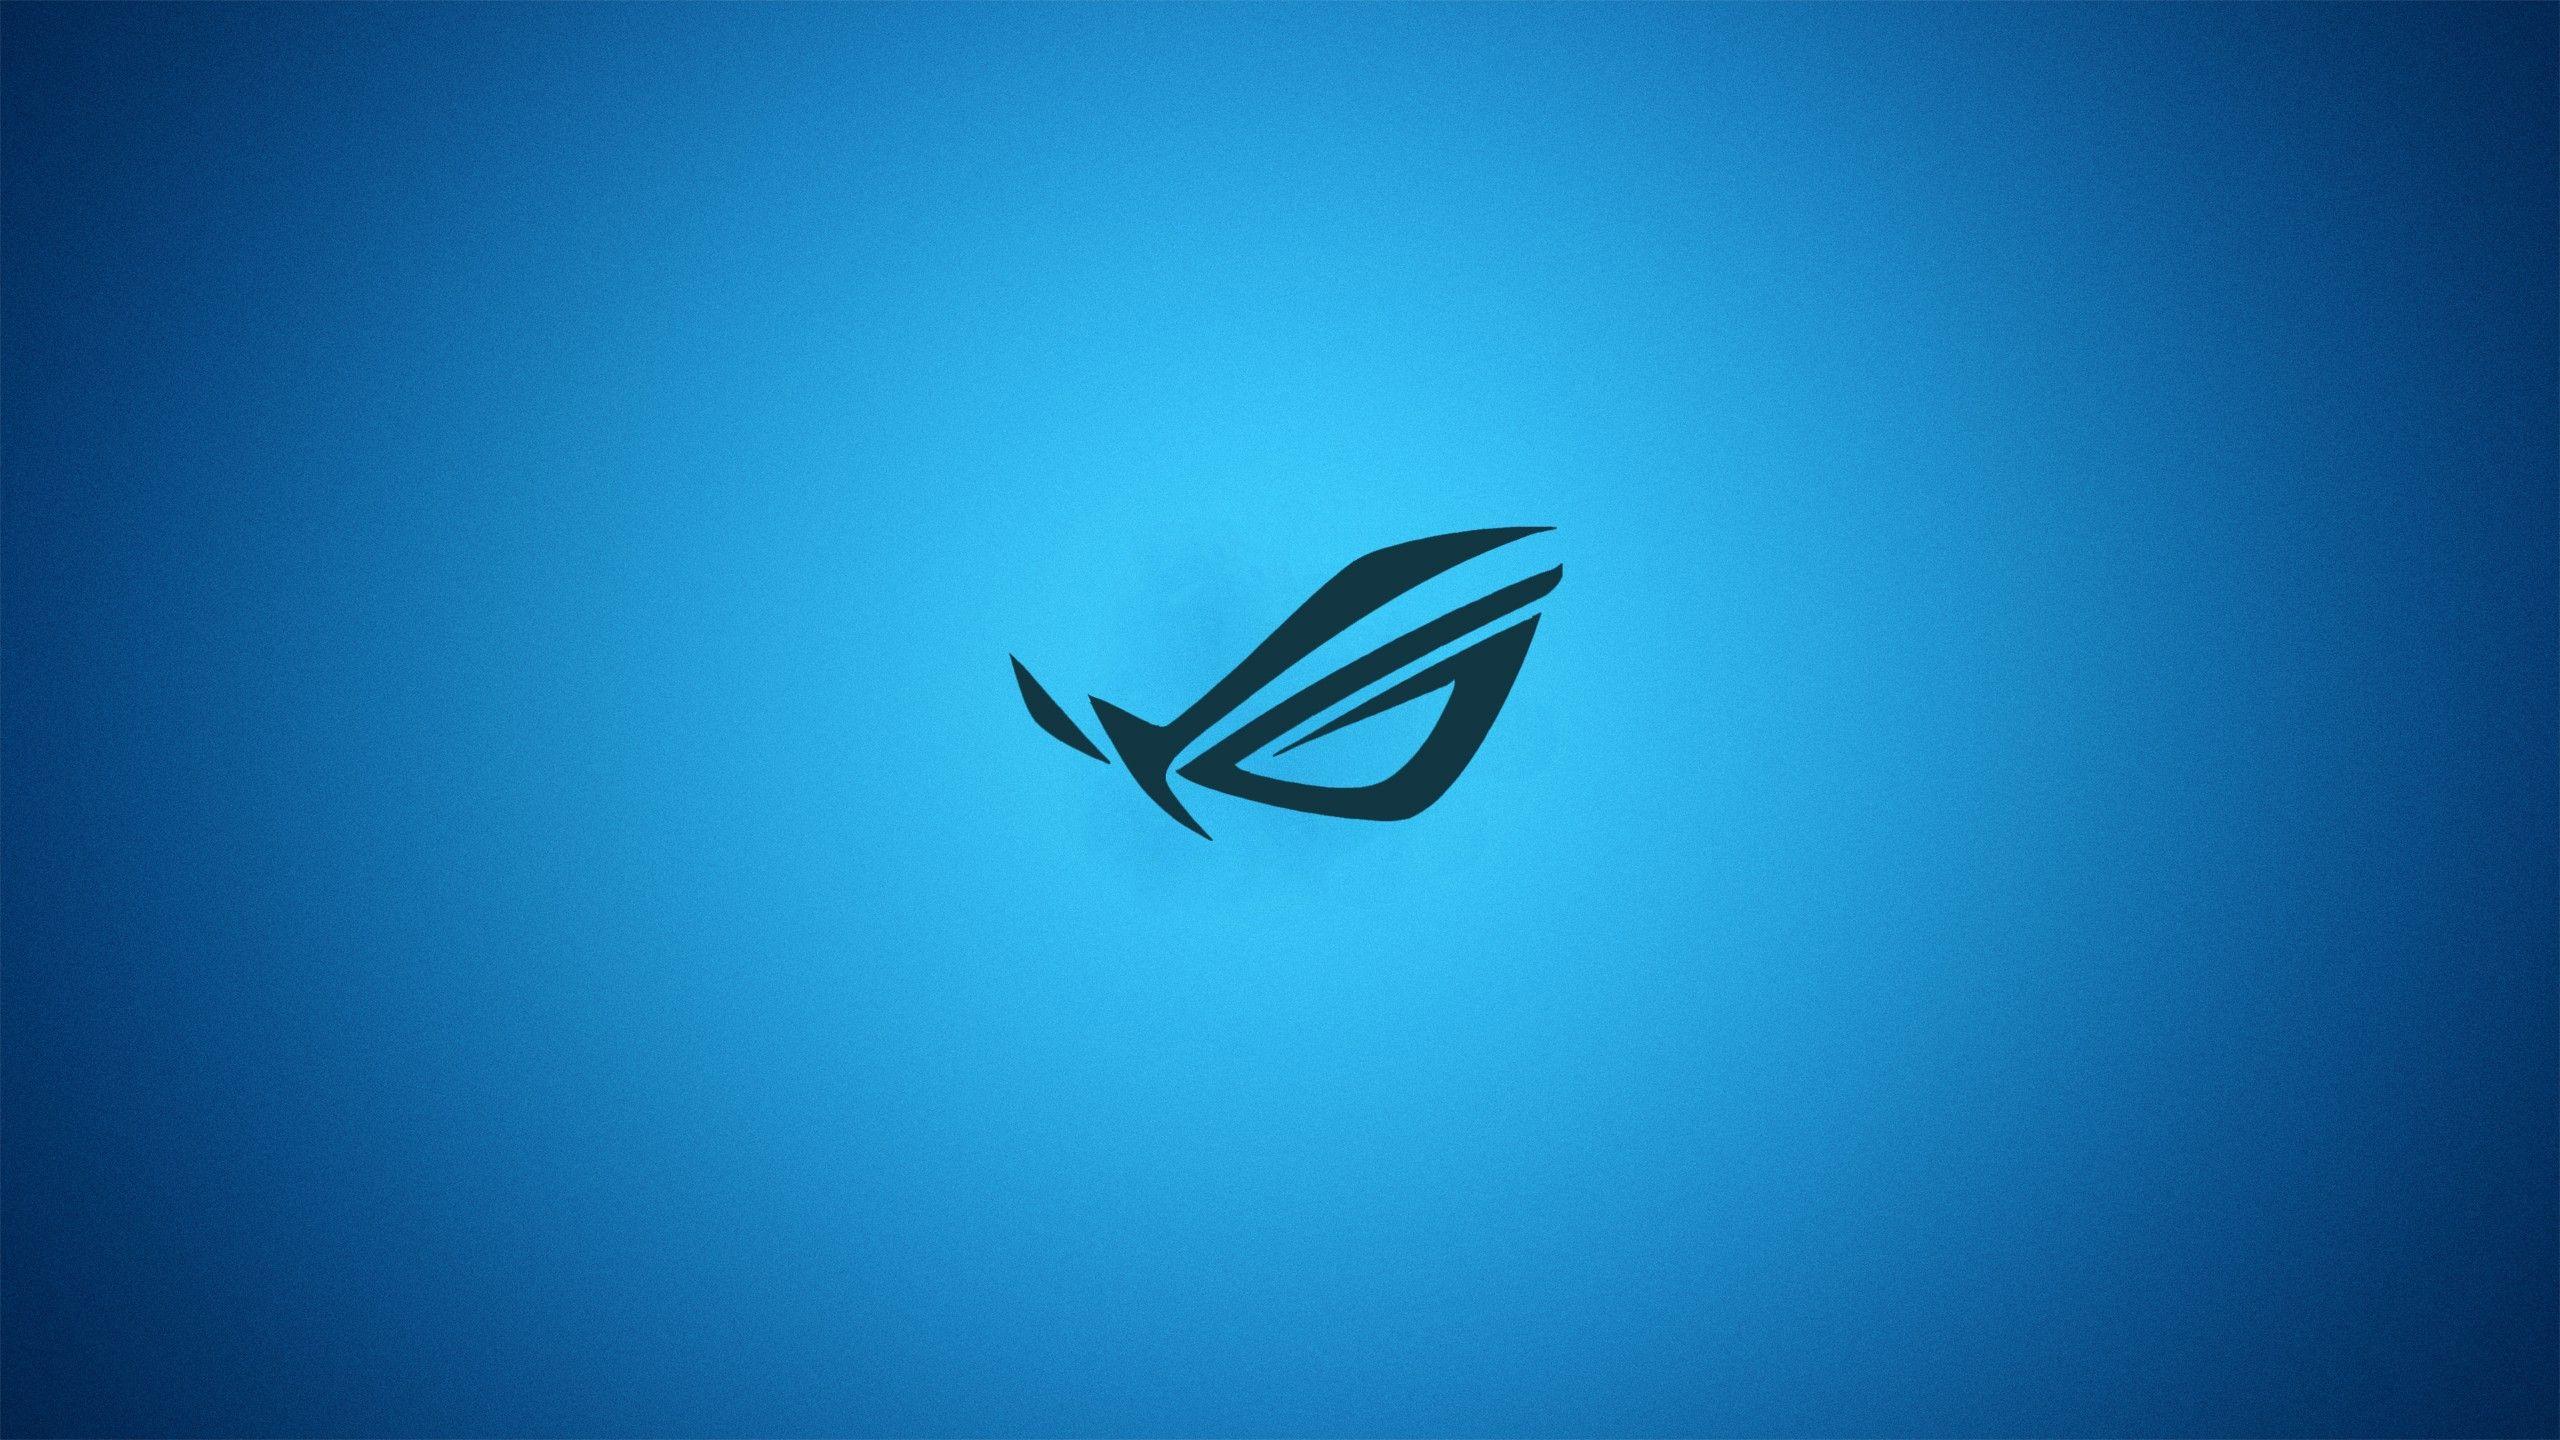 Asus Blue Wallpapers - Top Free Asus Blue Backgrounds - WallpaperAccess